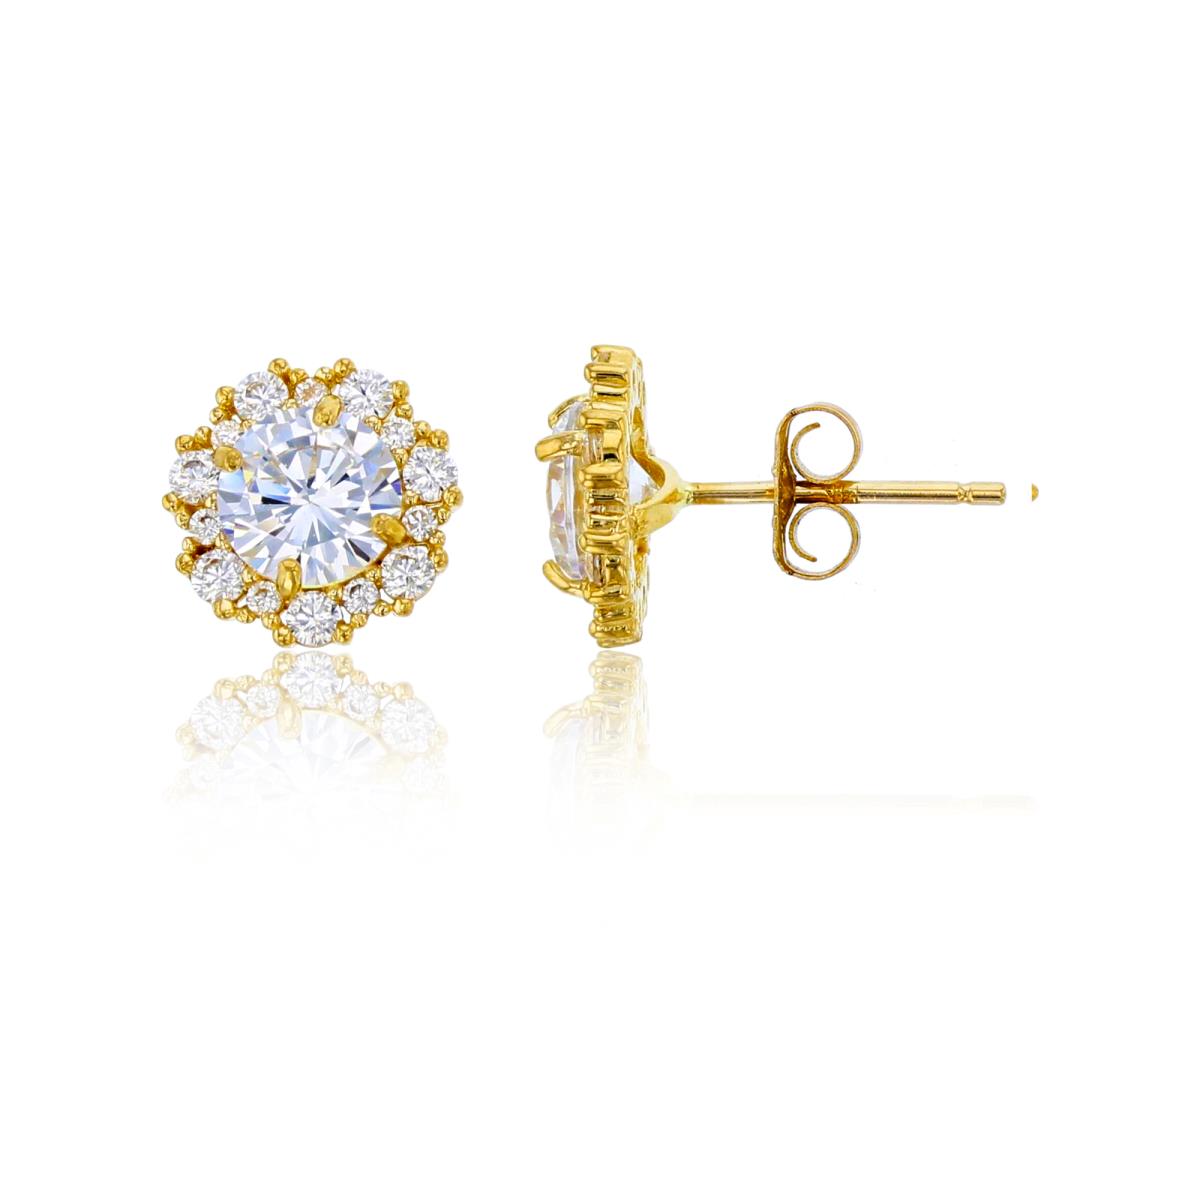 14K Yellow Gold 5mm Rnd CZ Flower Studs with 4.5mm Clutch